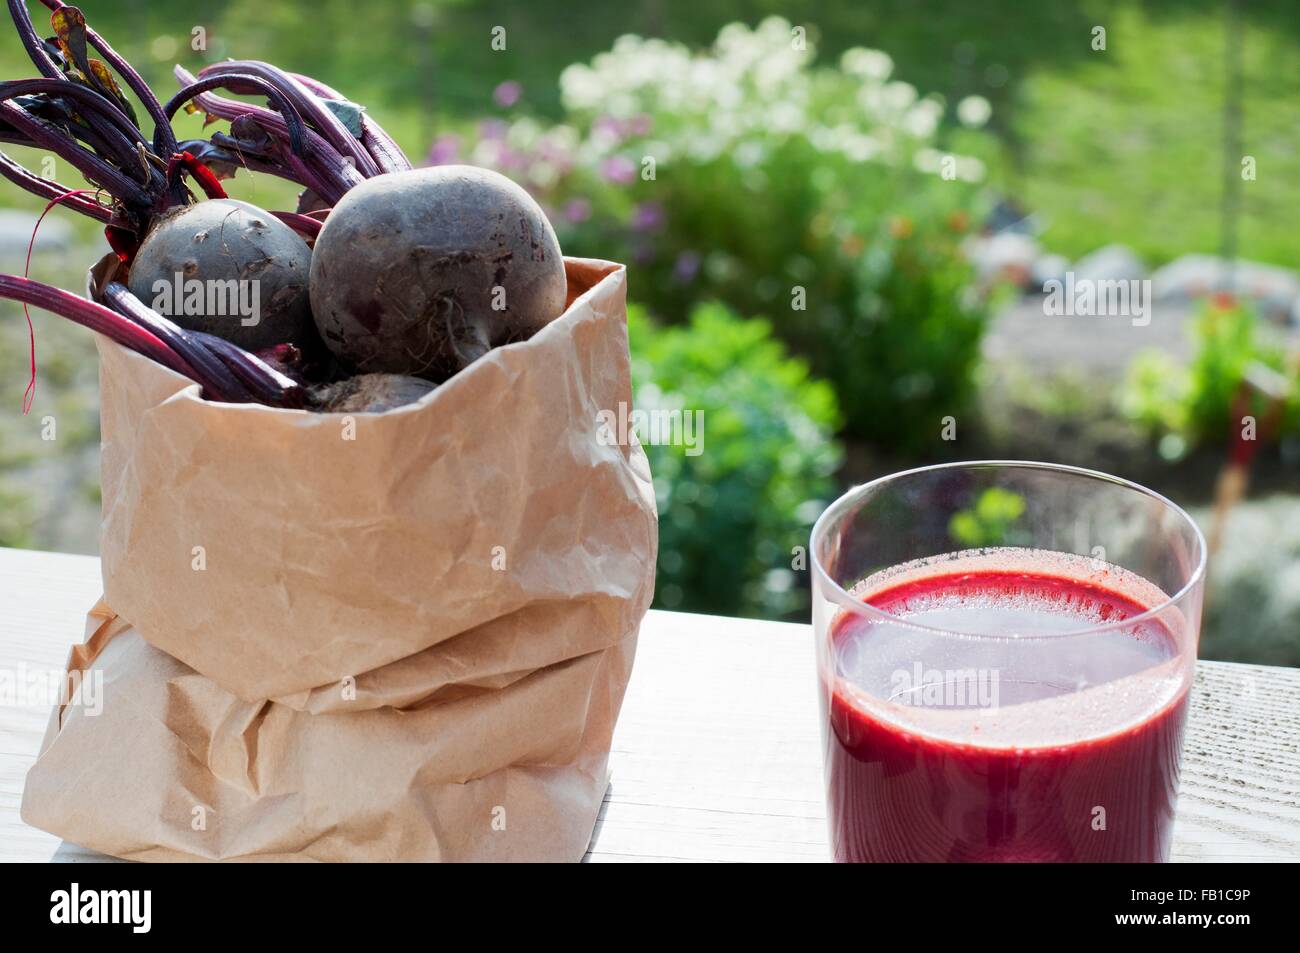 Bag of organic beetroot and glass of beetroot juice on garden table Stock Photo